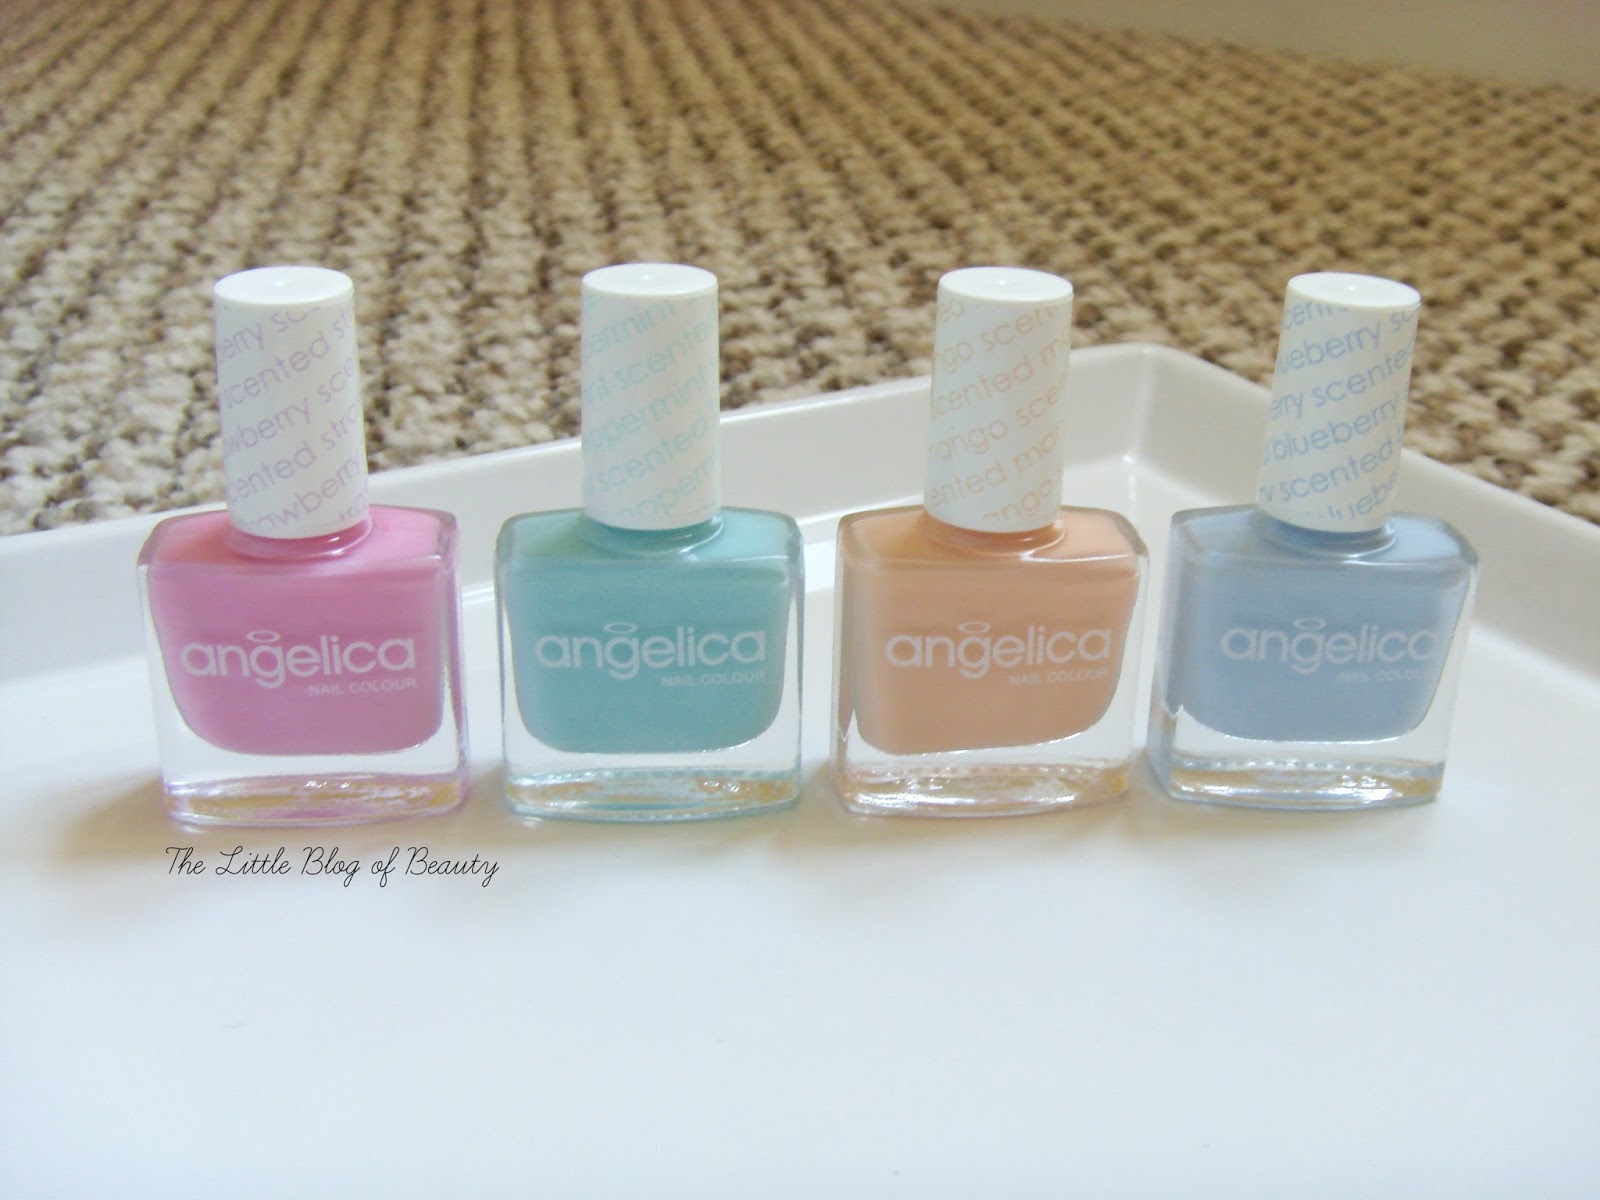 angelica nail colour Scented collection